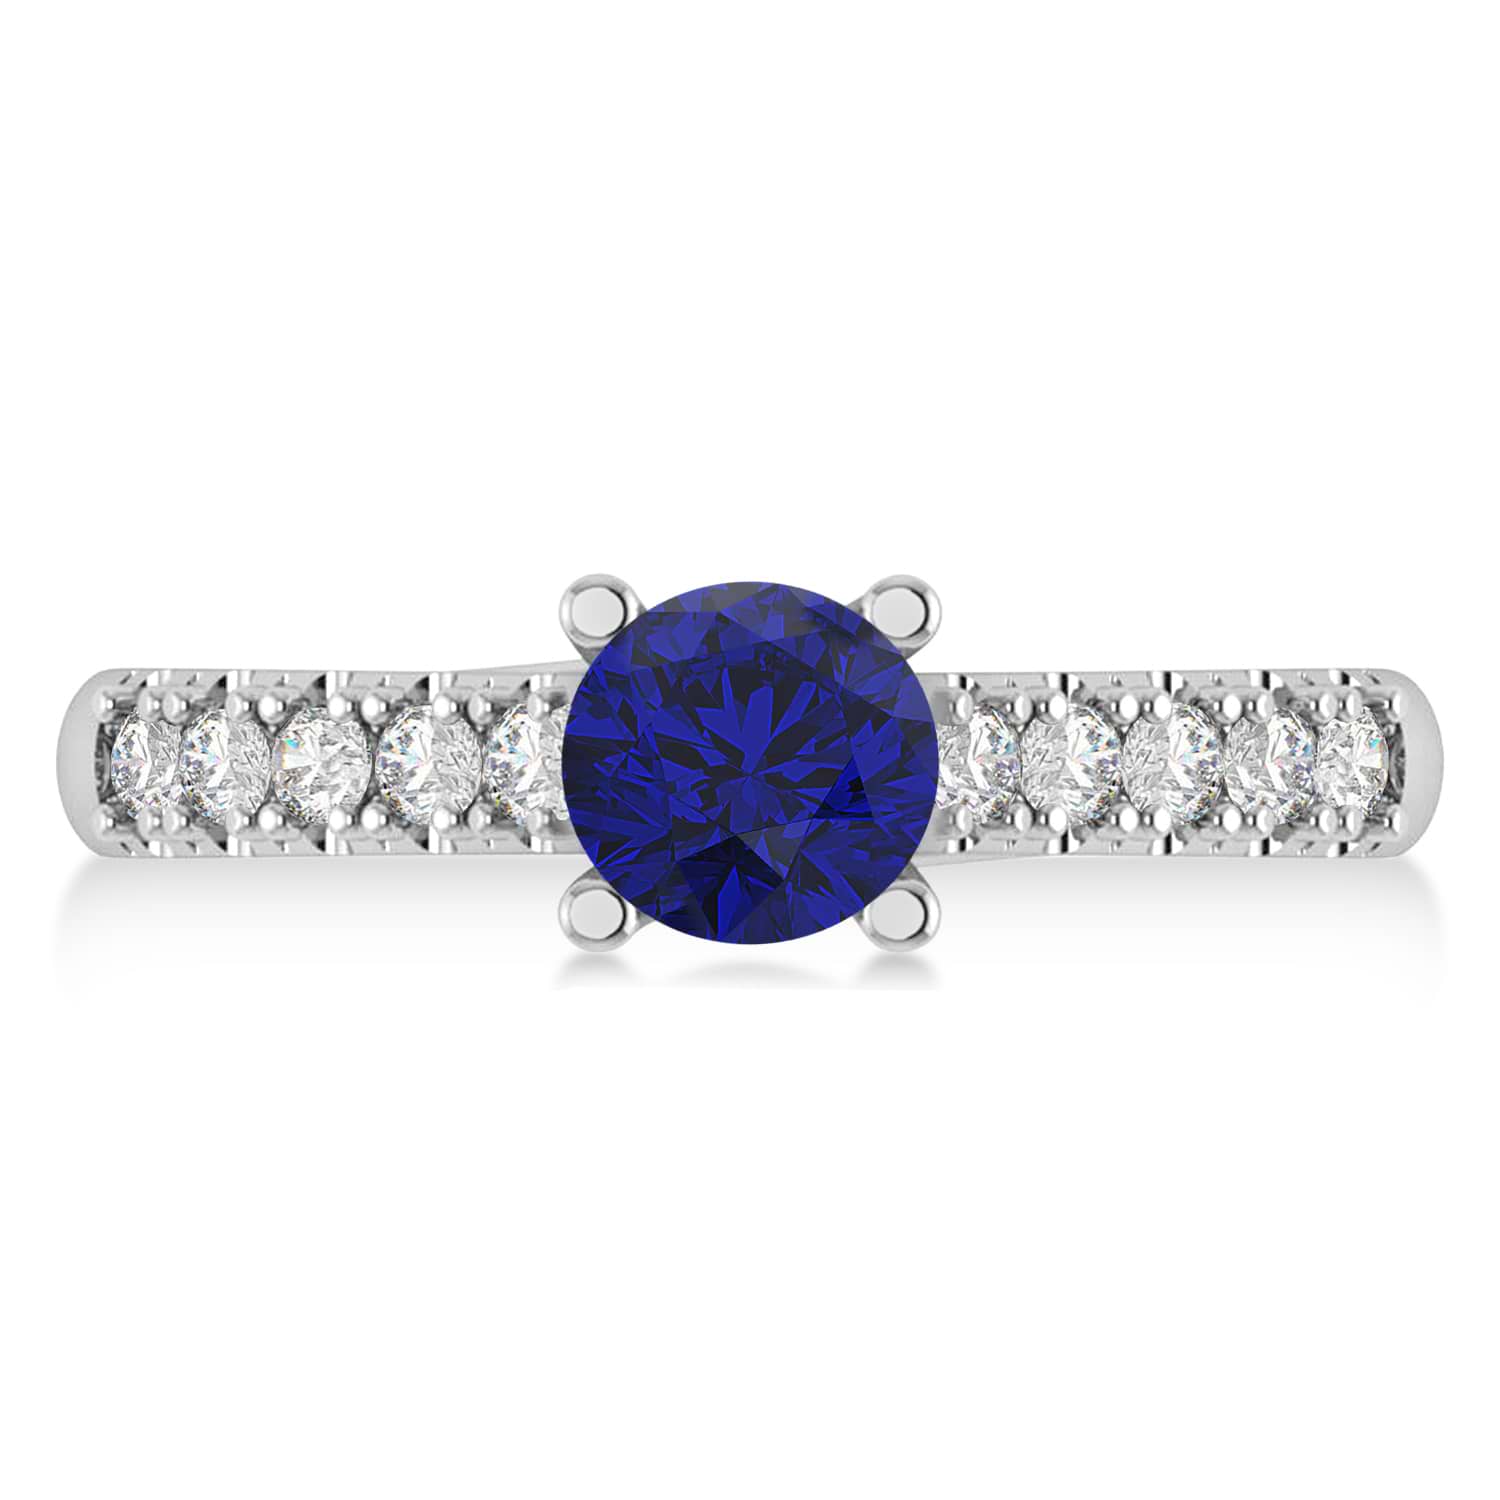 Blue Sapphire & Diamond Accented Pre-Set Engagement Ring 14k White Gold (1.05ct)